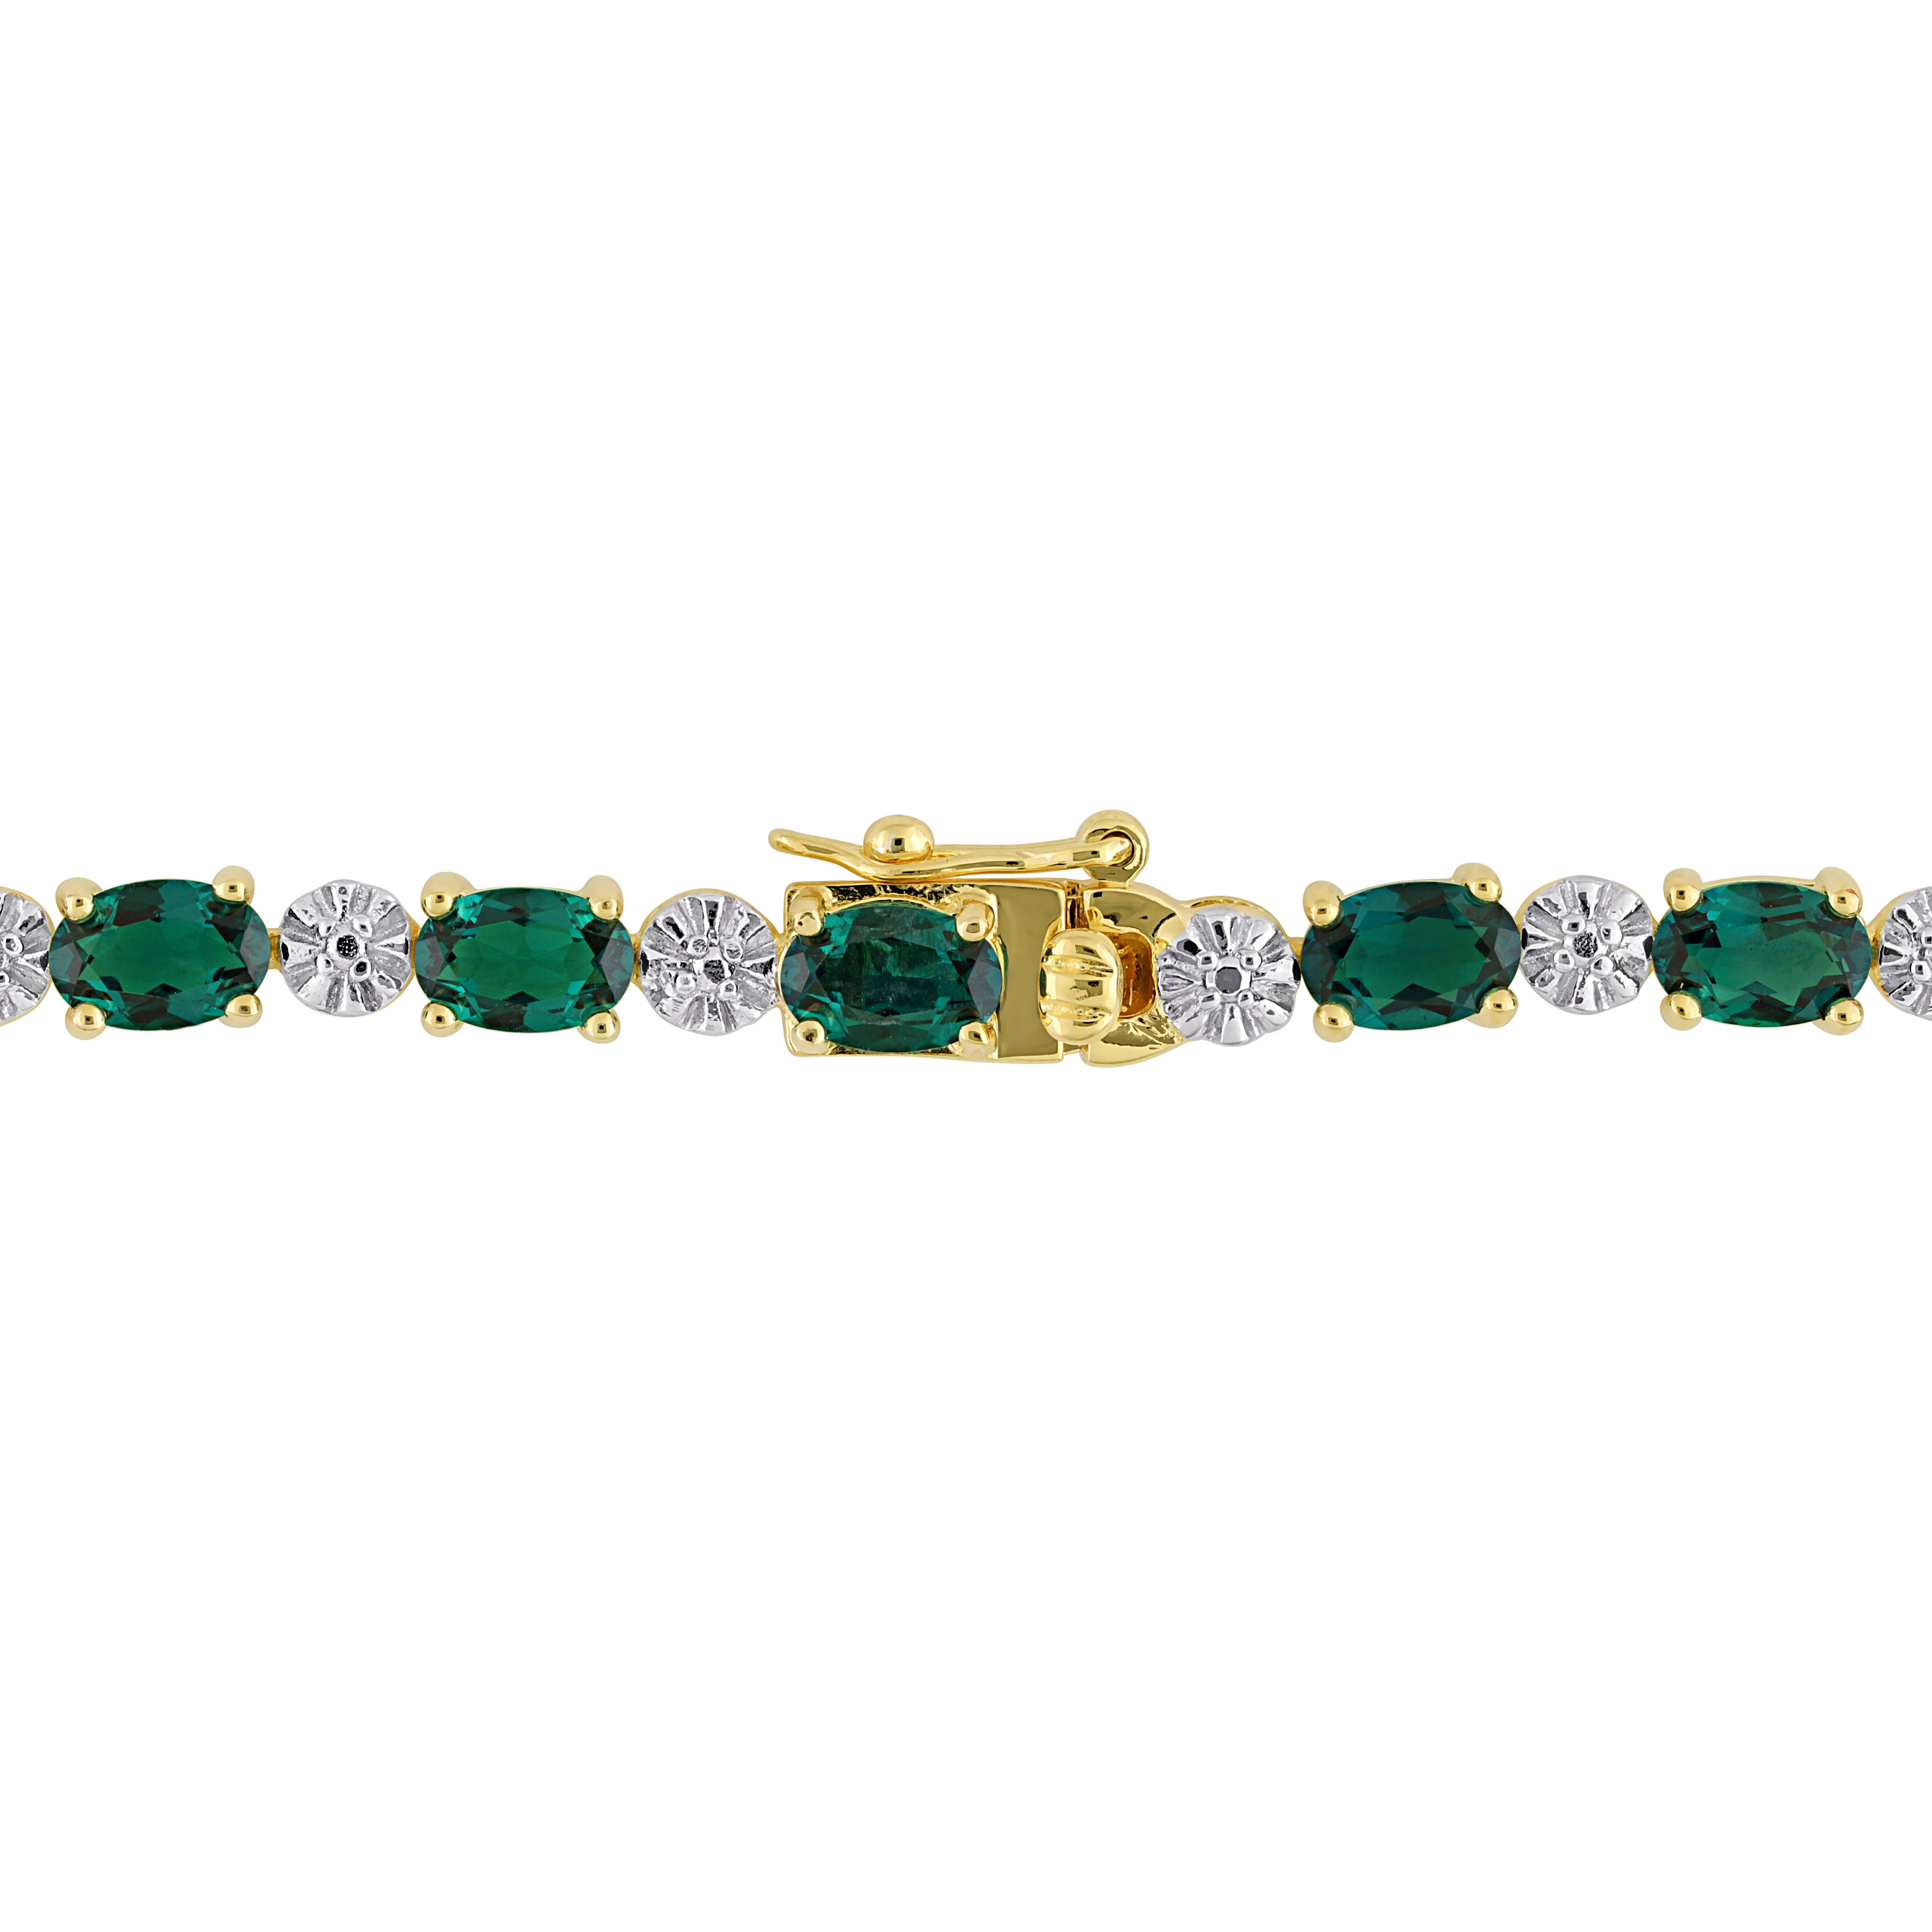 7 3/4 CT TGW Created Emerald and Diamond Bracelet in Yellow Plated Sterling Silver - 7.25 in.